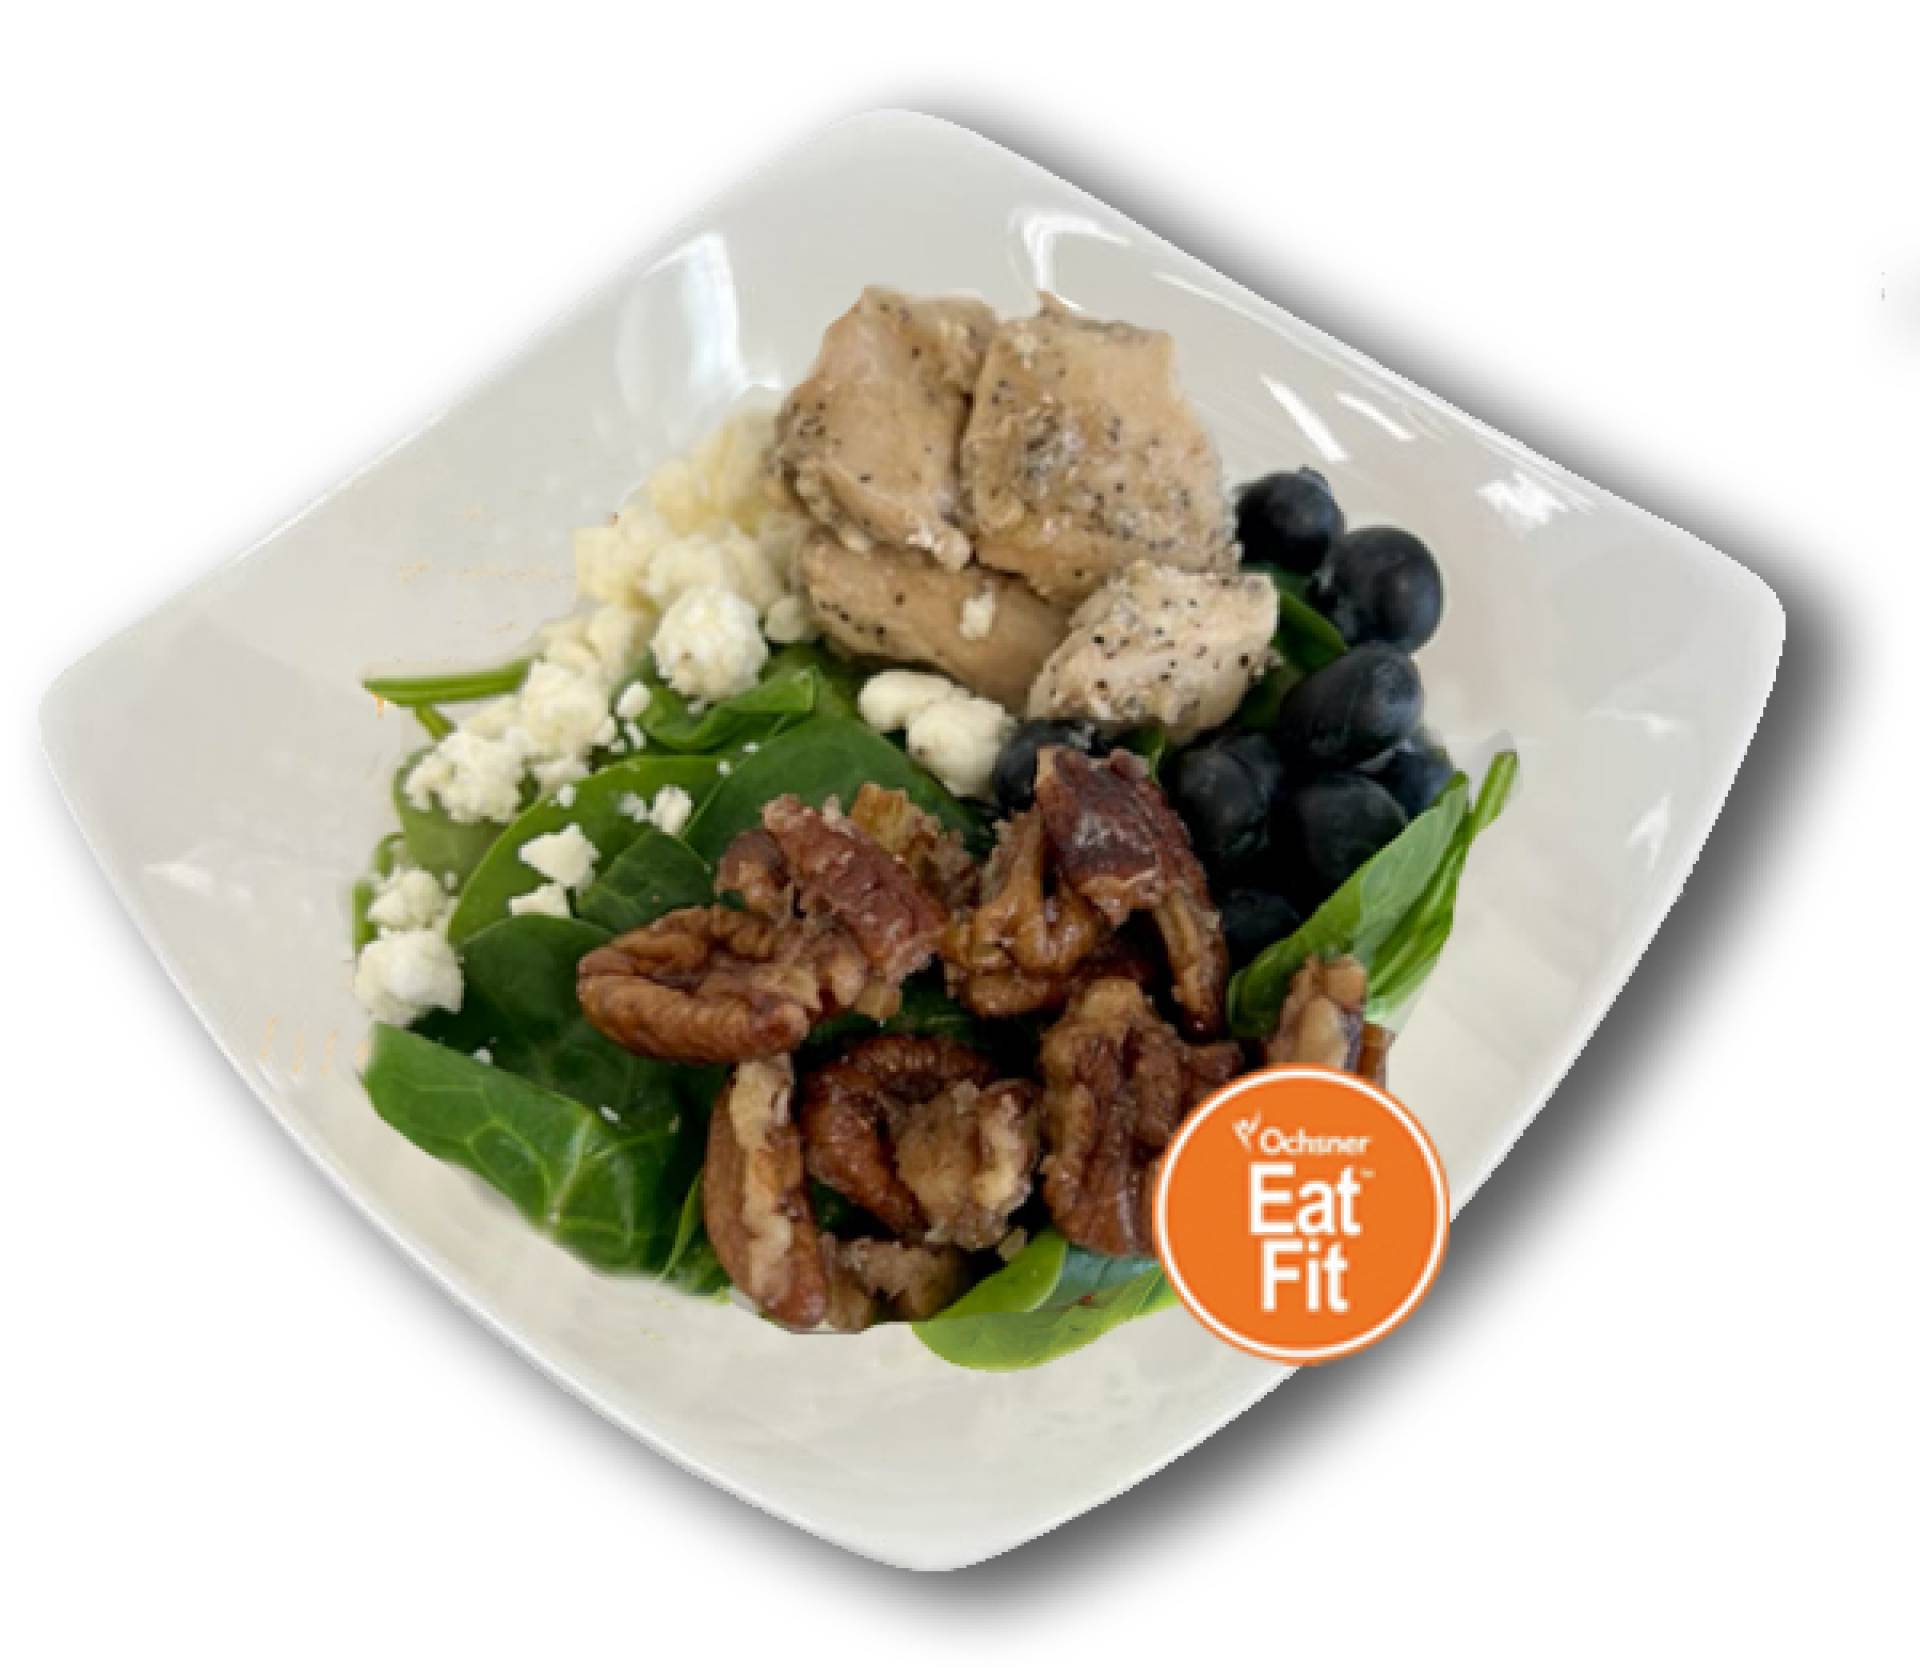 Grilled Chicken and Spinach Salad with Blueberries, Pecans and Balsamic Vinaigrette - Paleo